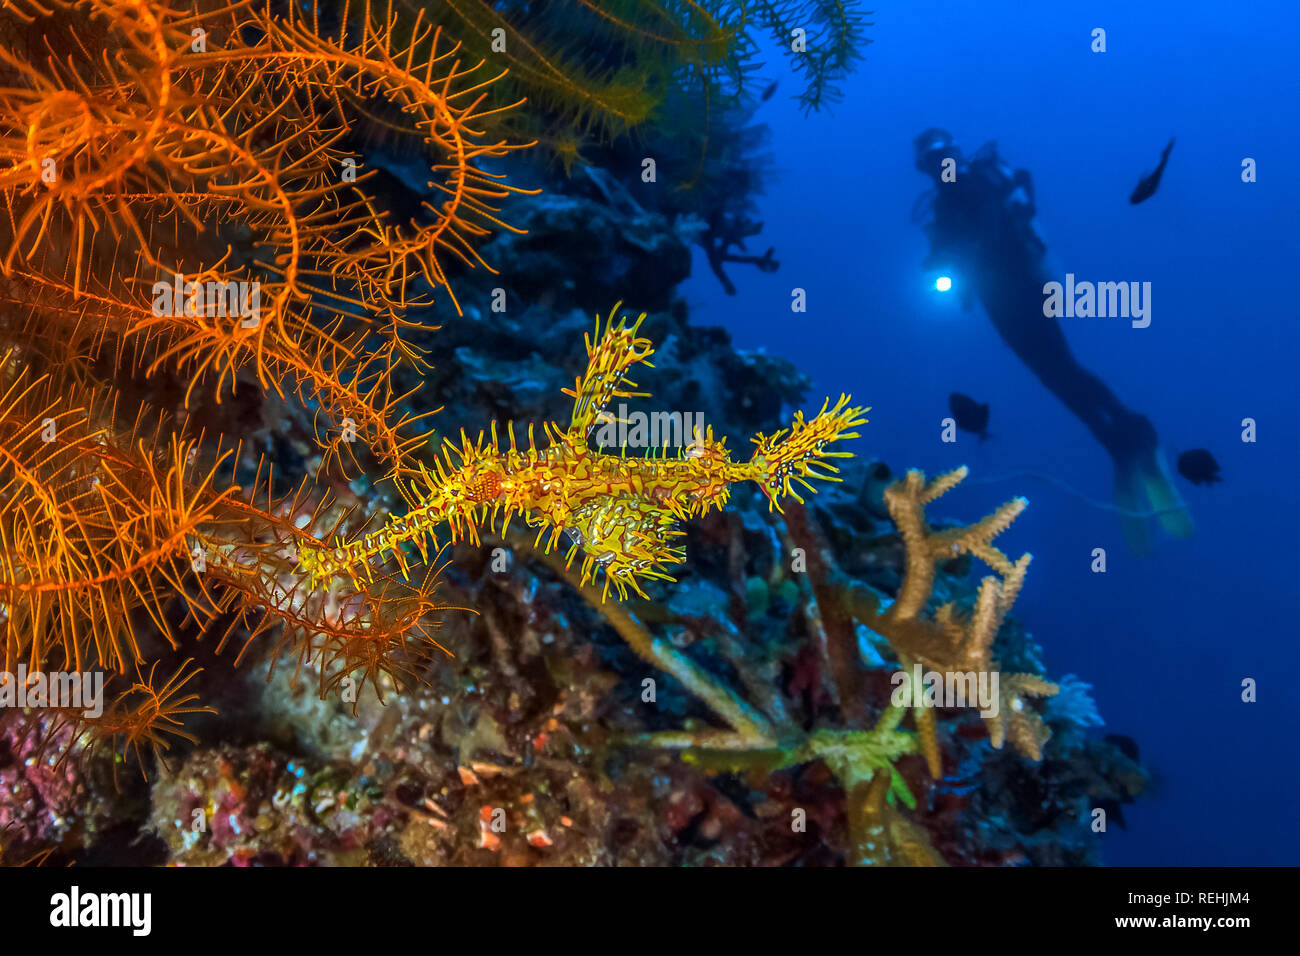 ornate ghost pipefish, harlequin ghost pipefish, Solenostomus paradoxus, and scuba diver, Bunaken National Park, North Sulawesi, Indonesia, Celebes Se Stock Photo